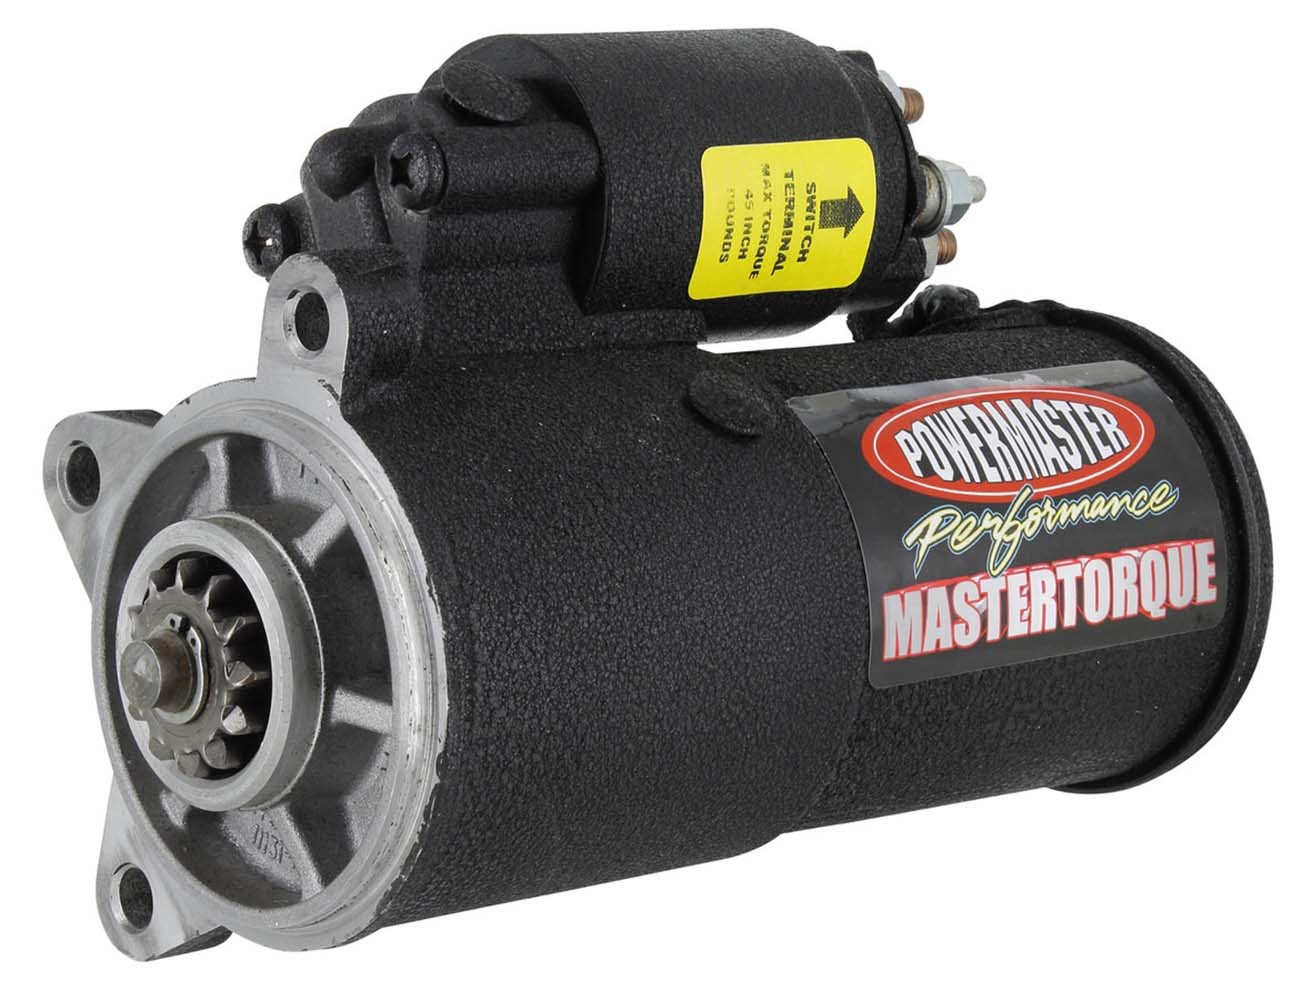 Powermaster Performance 9632 - Starter, Master Torque, 3.25:1 Gear Reduction, Black, Ford Coyote / Modular, Each